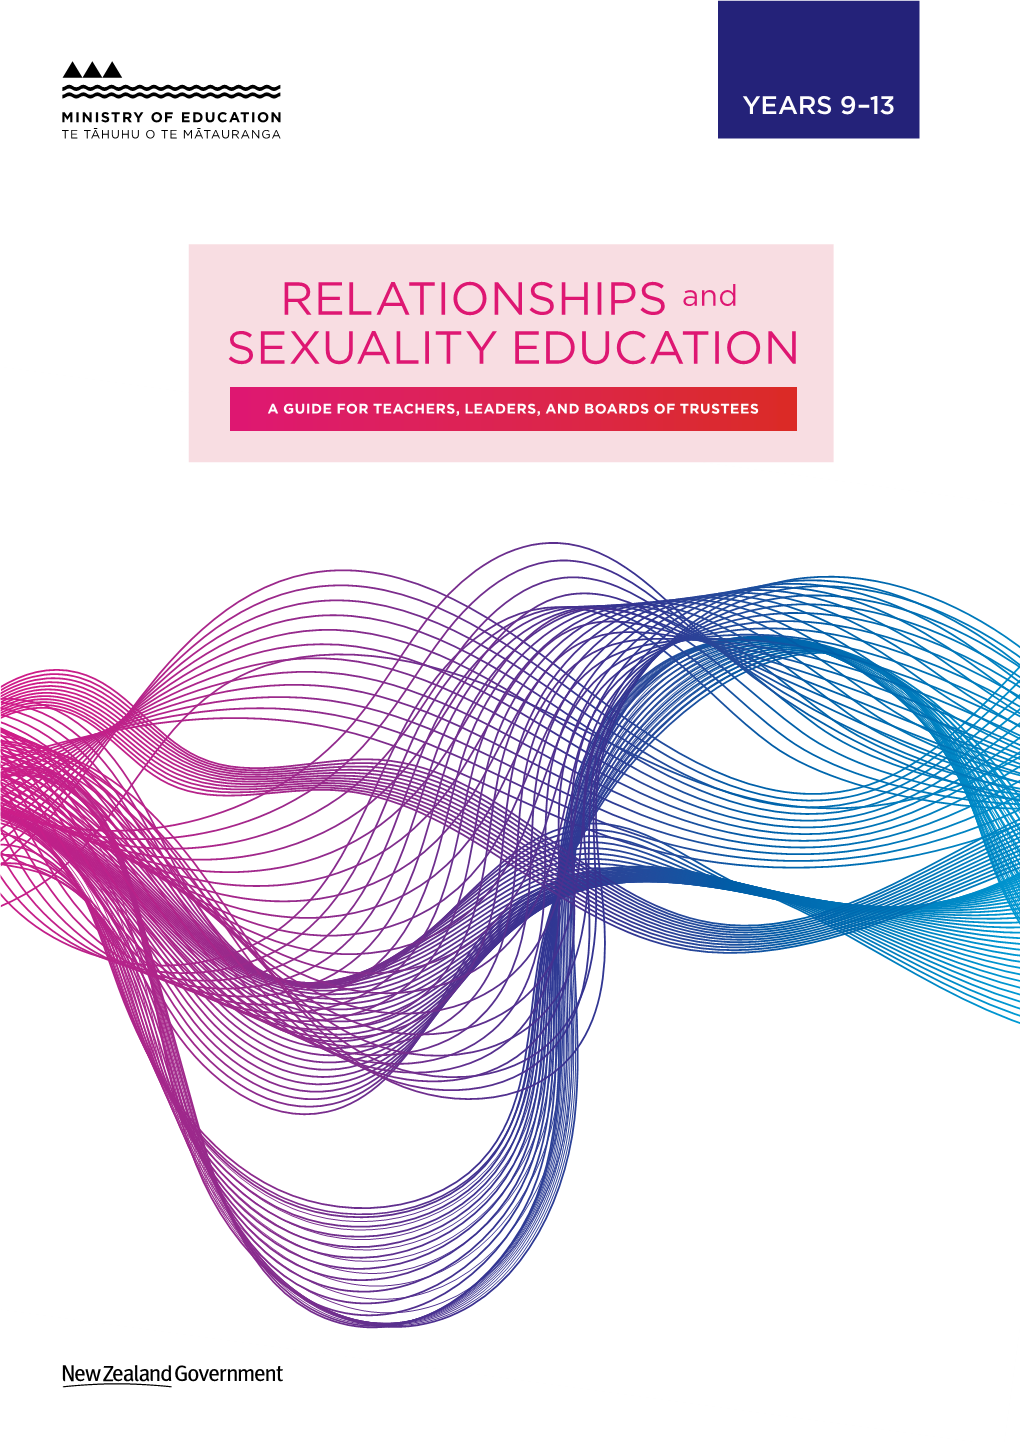 RELATIONSHIPS and SEXUALITY EDUCATION YEARS 9—13 Published 2020 by the Ministry of Education PO Box 1666, Wellington 6140, New Zealand